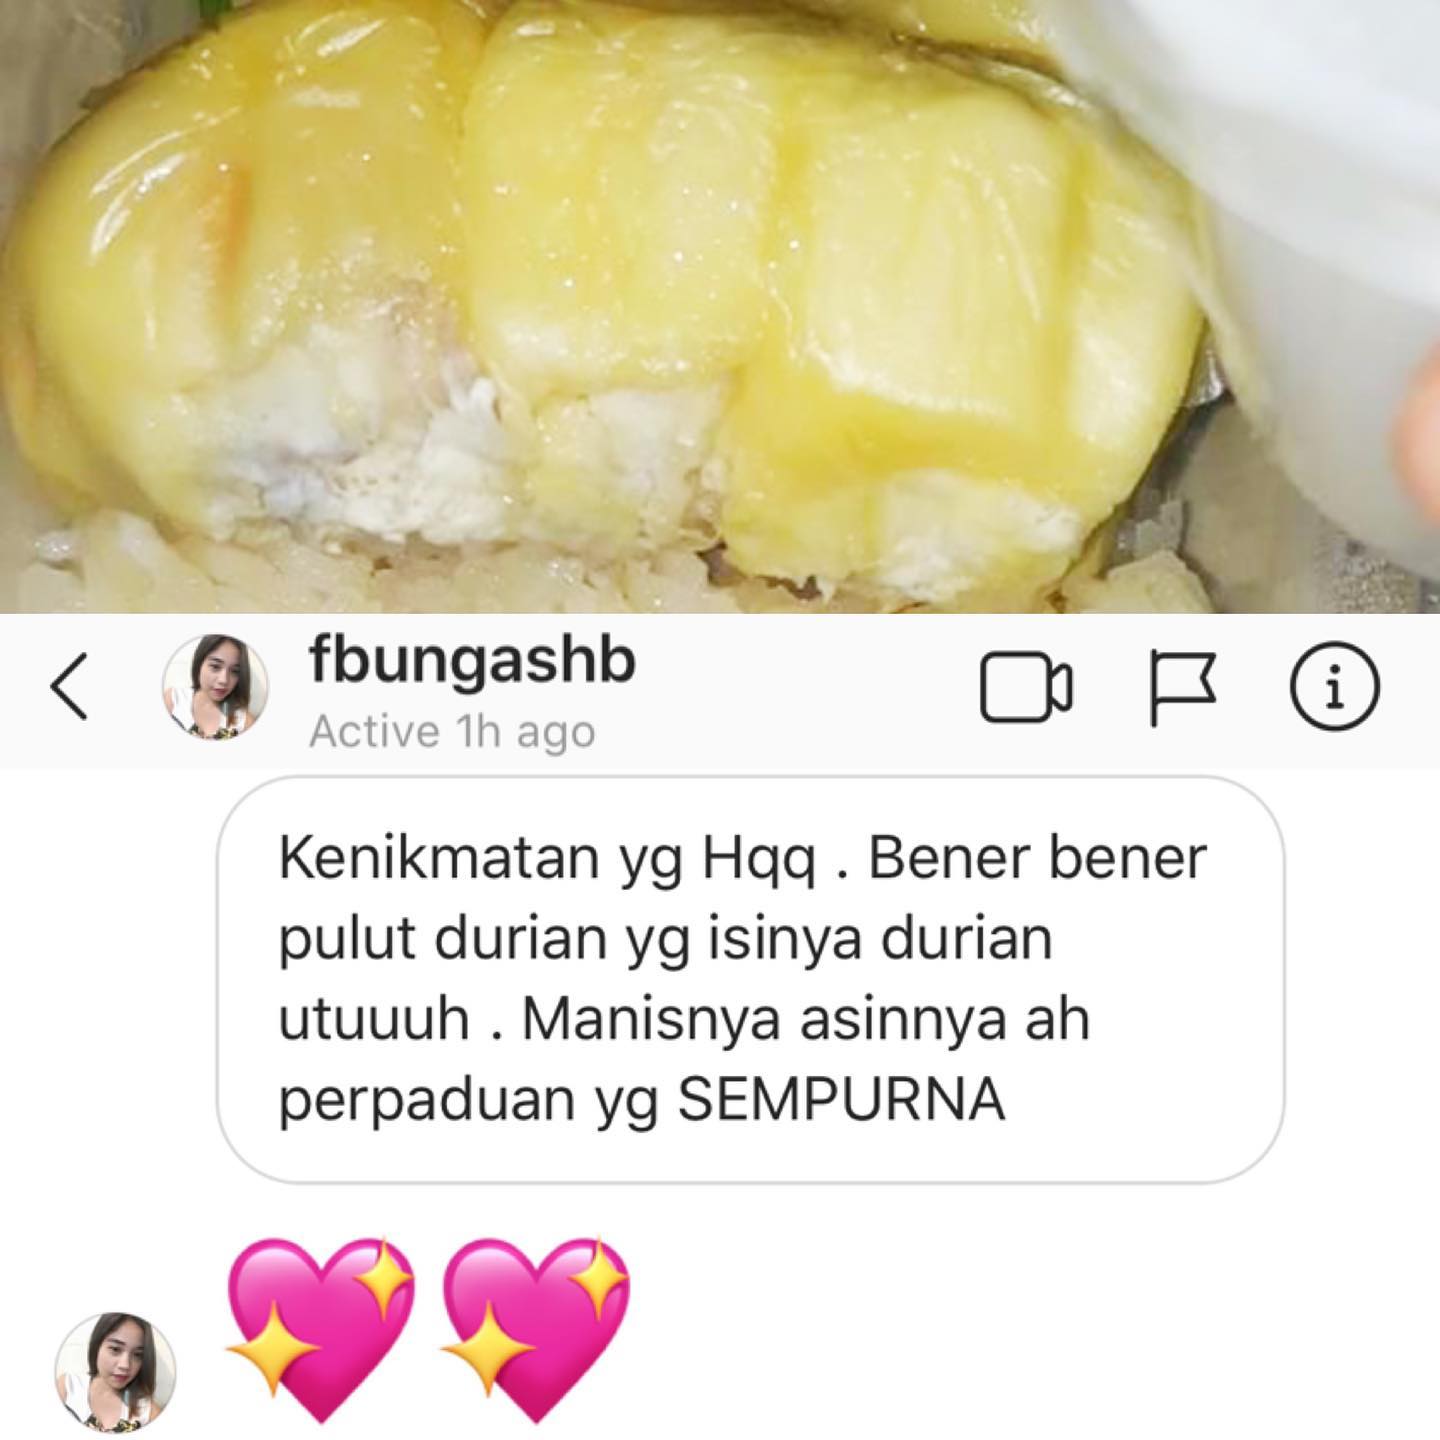 Pulut Durian Kinley Thai Bistro
“SEMPURNA”
Thank you for your kindest review @fbungashb 
.
Read more